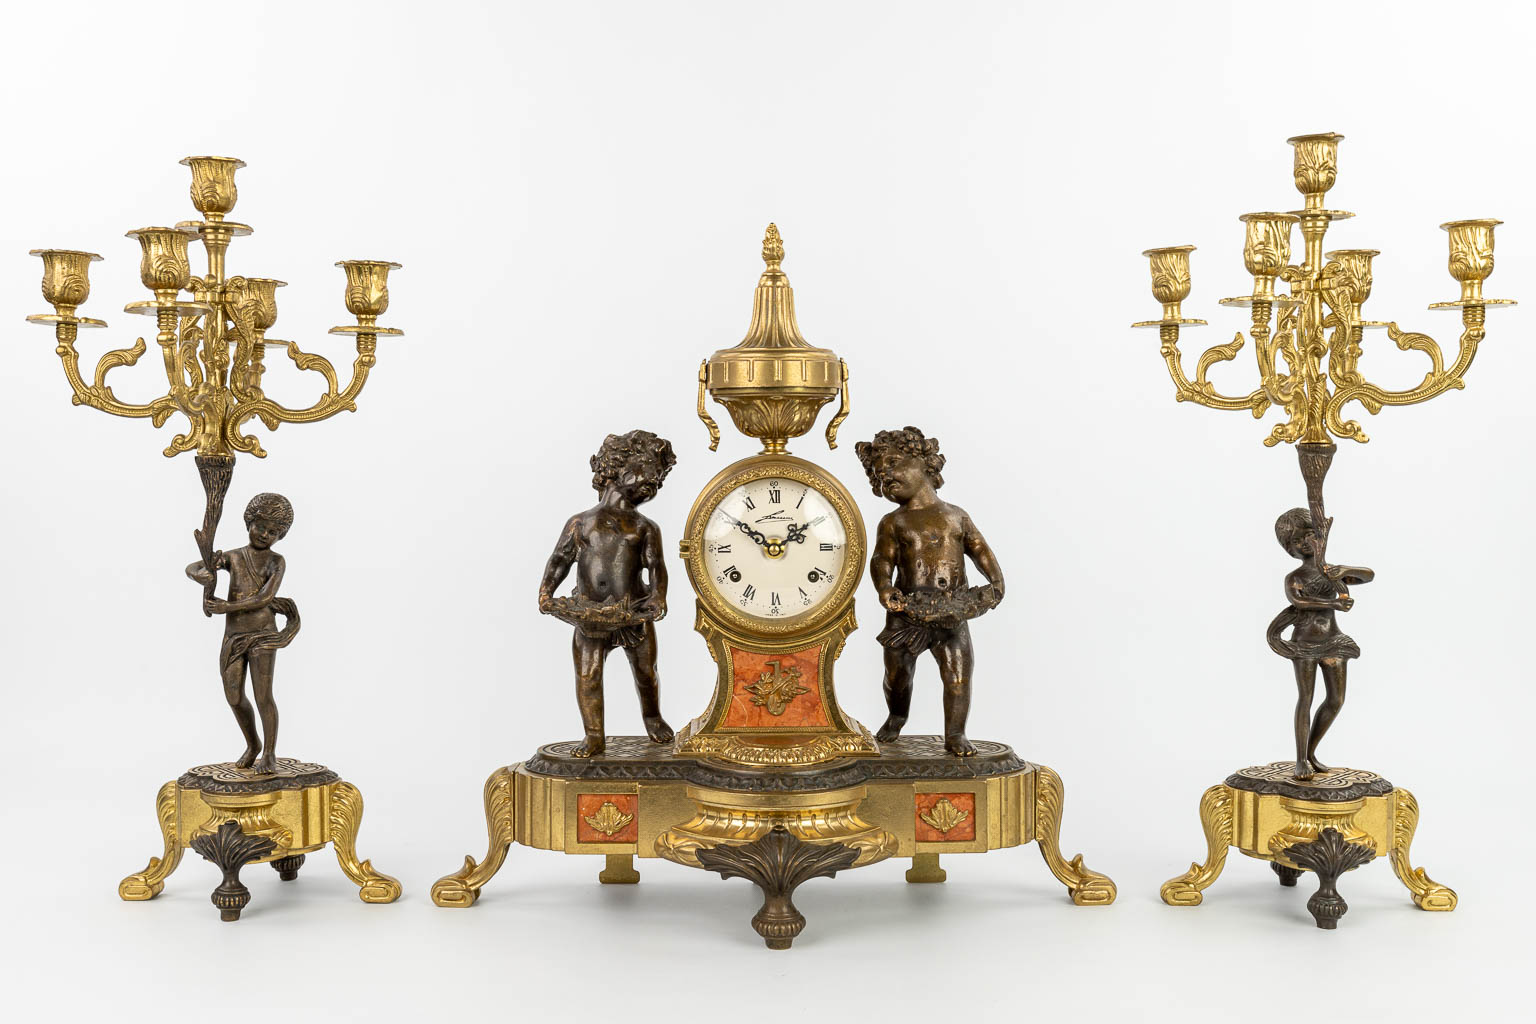 A three-piece mantle clock made of patinated and polished bronze, decorated with putti. (H:46cm)